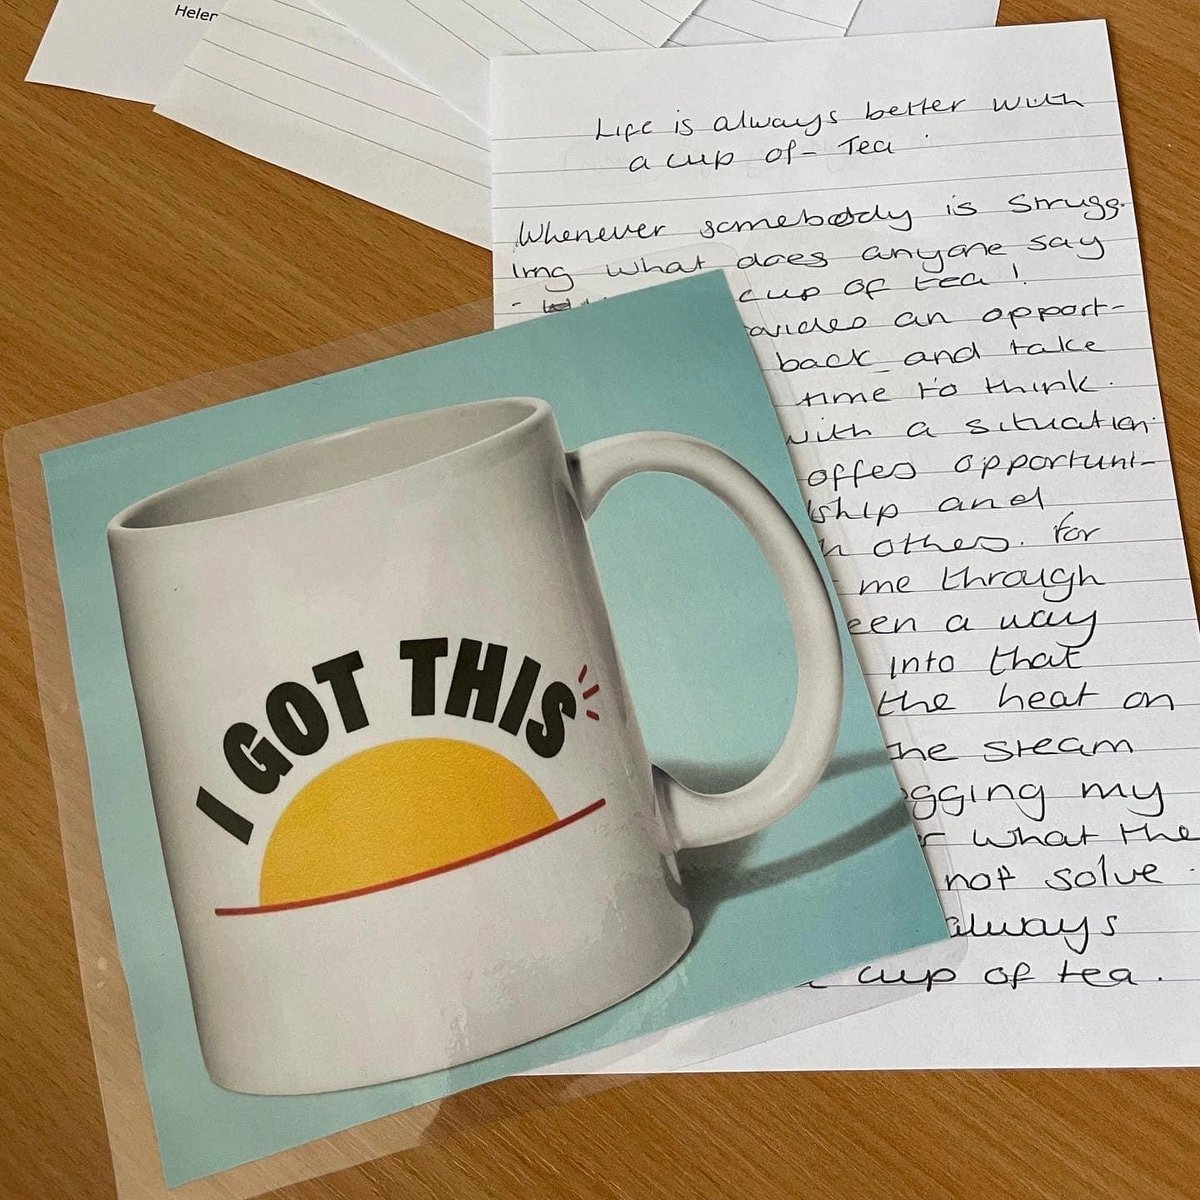 ⭐️⭐️⭐️⭐️ How's this for a great write-up? The first in a series of creative writing courses from Write on the Tyne @aitchisonwrites and funded by North Shields Cultural Quarter has had rave reviews from attendees. Find out more here: bit.ly/44vruDF